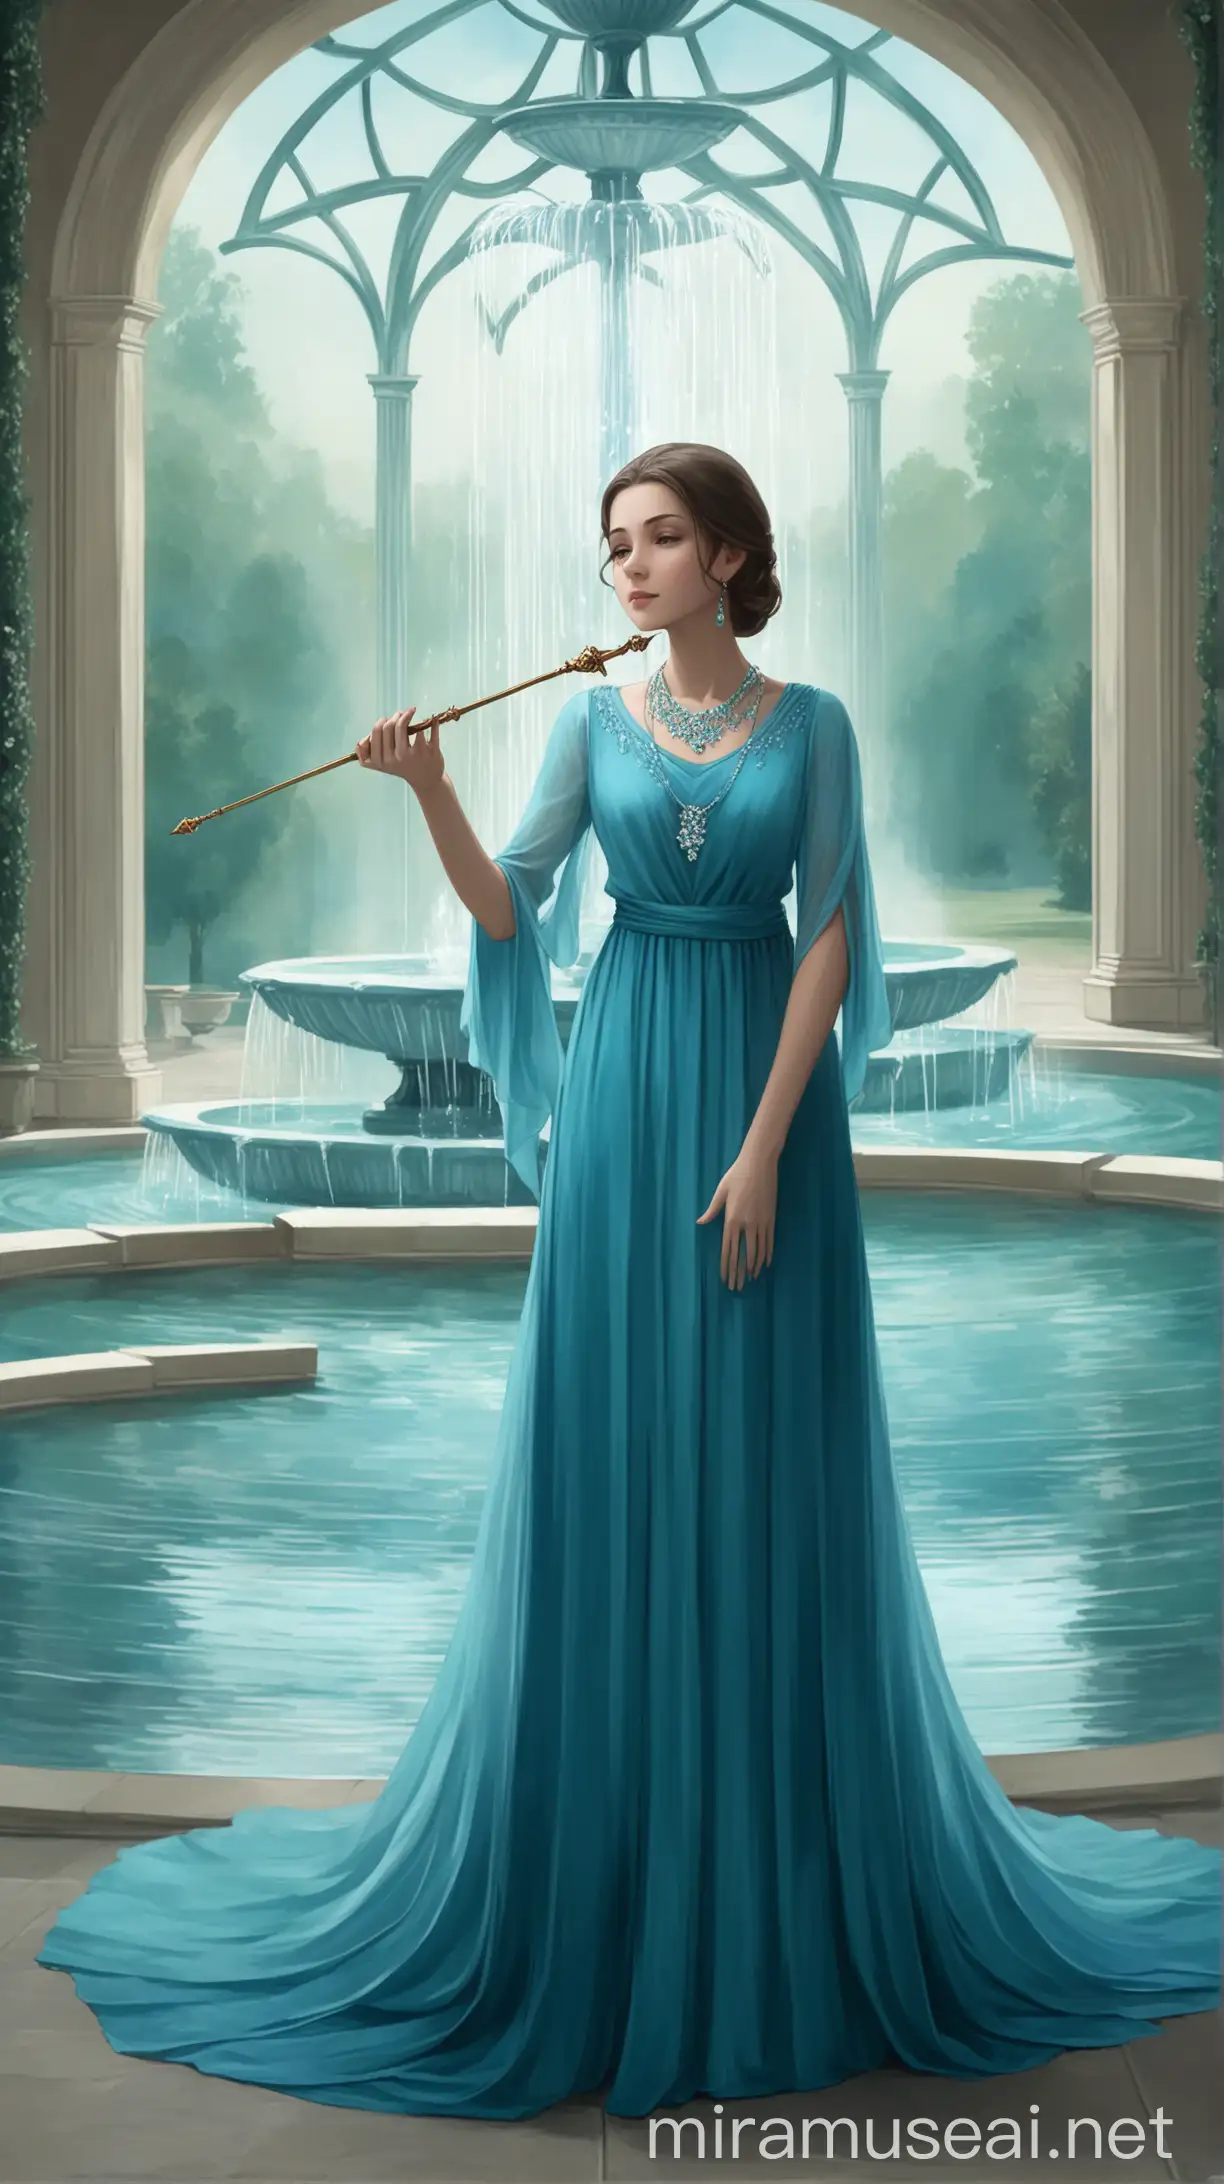 Elegant Young Woman with Wand by Serene Fountain